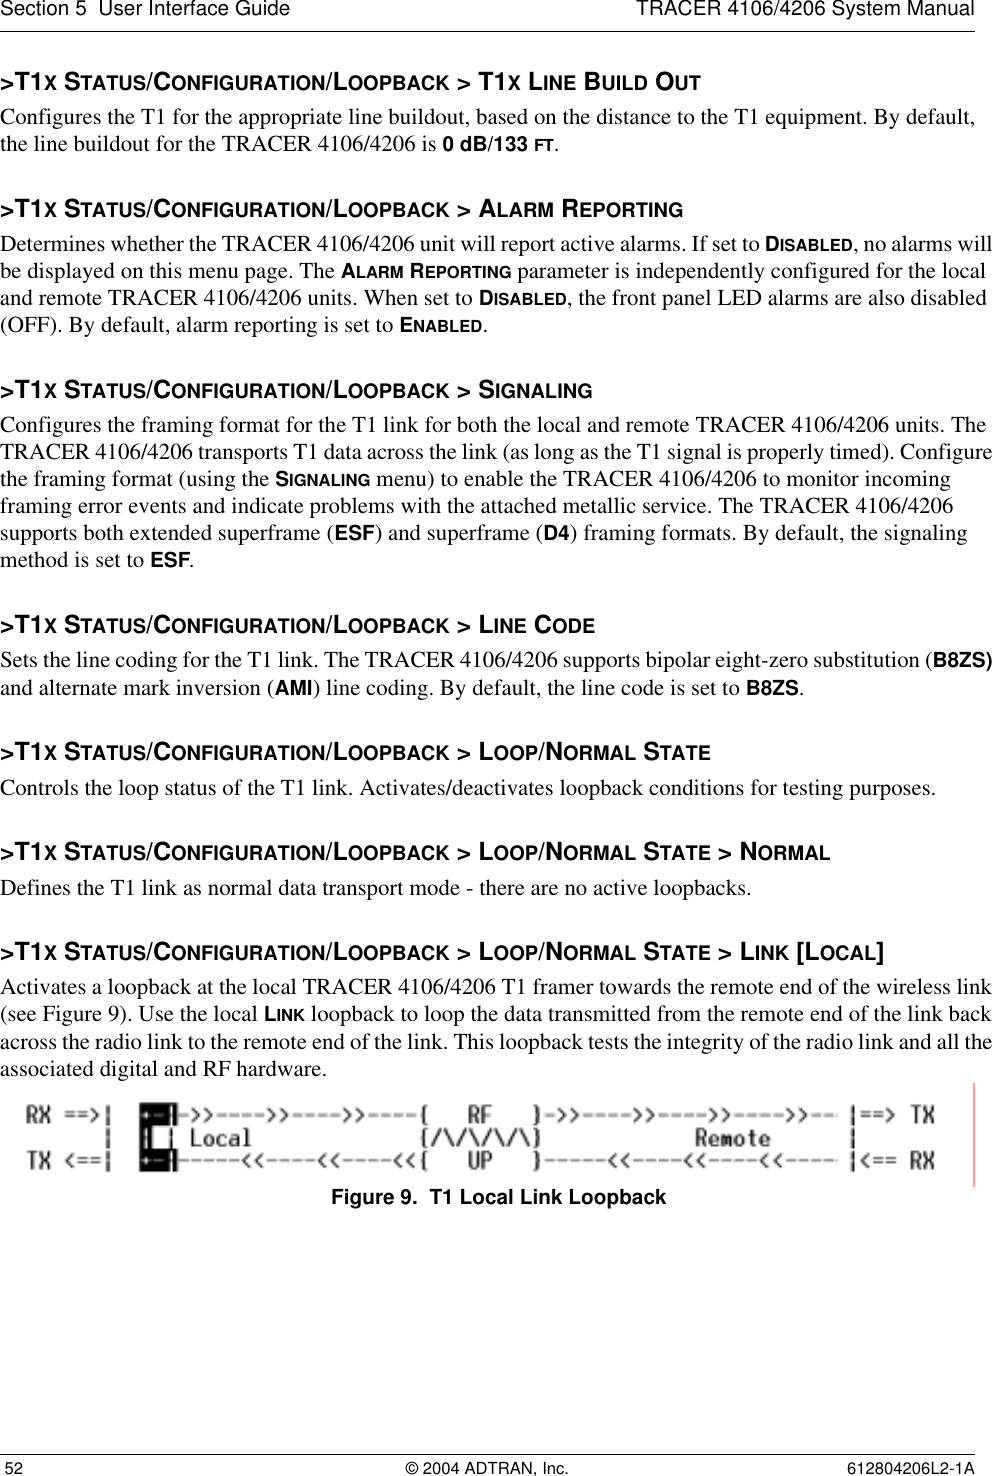 Section 5  User Interface Guide TRACER 4106/4206 System Manual 52 © 2004 ADTRAN, Inc. 612804206L2-1A&gt;T1X STATUS/CONFIGURATION/LOOPBACK &gt; T1X LINE BUILD OUTConfigures the T1 for the appropriate line buildout, based on the distance to the T1 equipment. By default, the line buildout for the TRACER 4106/4206 is 0 dB/133 FT.&gt;T1X STATUS/CONFIGURATION/LOOPBACK &gt; ALARM REPORTINGDetermines whether the TRACER 4106/4206 unit will report active alarms. If set to DISABLED, no alarms will be displayed on this menu page. The ALARM REPORTING parameter is independently configured for the local and remote TRACER 4106/4206 units. When set to DISABLED, the front panel LED alarms are also disabled (OFF). By default, alarm reporting is set to ENABLED.&gt;T1X STATUS/CONFIGURATION/LOOPBACK &gt; SIGNALINGConfigures the framing format for the T1 link for both the local and remote TRACER 4106/4206 units. The TRACER 4106/4206 transports T1 data across the link (as long as the T1 signal is properly timed). Configure the framing format (using the SIGNALING menu) to enable the TRACER 4106/4206 to monitor incoming framing error events and indicate problems with the attached metallic service. The TRACER 4106/4206 supports both extended superframe (ESF) and superframe (D4) framing formats. By default, the signaling method is set to ESF.&gt;T1X STATUS/CONFIGURATION/LOOPBACK &gt; LINE CODESets the line coding for the T1 link. The TRACER 4106/4206 supports bipolar eight-zero substitution (B8ZS) and alternate mark inversion (AMI) line coding. By default, the line code is set to B8ZS.&gt;T1X STATUS/CONFIGURATION/LOOPBACK &gt; LOOP/NORMAL STATEControls the loop status of the T1 link. Activates/deactivates loopback conditions for testing purposes.&gt;T1X STATUS/CONFIGURATION/LOOPBACK &gt; LOOP/NORMAL STATE &gt; NORMALDefines the T1 link as normal data transport mode - there are no active loopbacks.&gt;T1X STATUS/CONFIGURATION/LOOPBACK &gt; LOOP/NORMAL STATE &gt; LINK [LOCAL]Activates a loopback at the local TRACER 4106/4206 T1 framer towards the remote end of the wireless link (see Figure 9). Use the local LINK loopback to loop the data transmitted from the remote end of the link back across the radio link to the remote end of the link. This loopback tests the integrity of the radio link and all the associated digital and RF hardware.Figure 9.  T1 Local Link Loopback